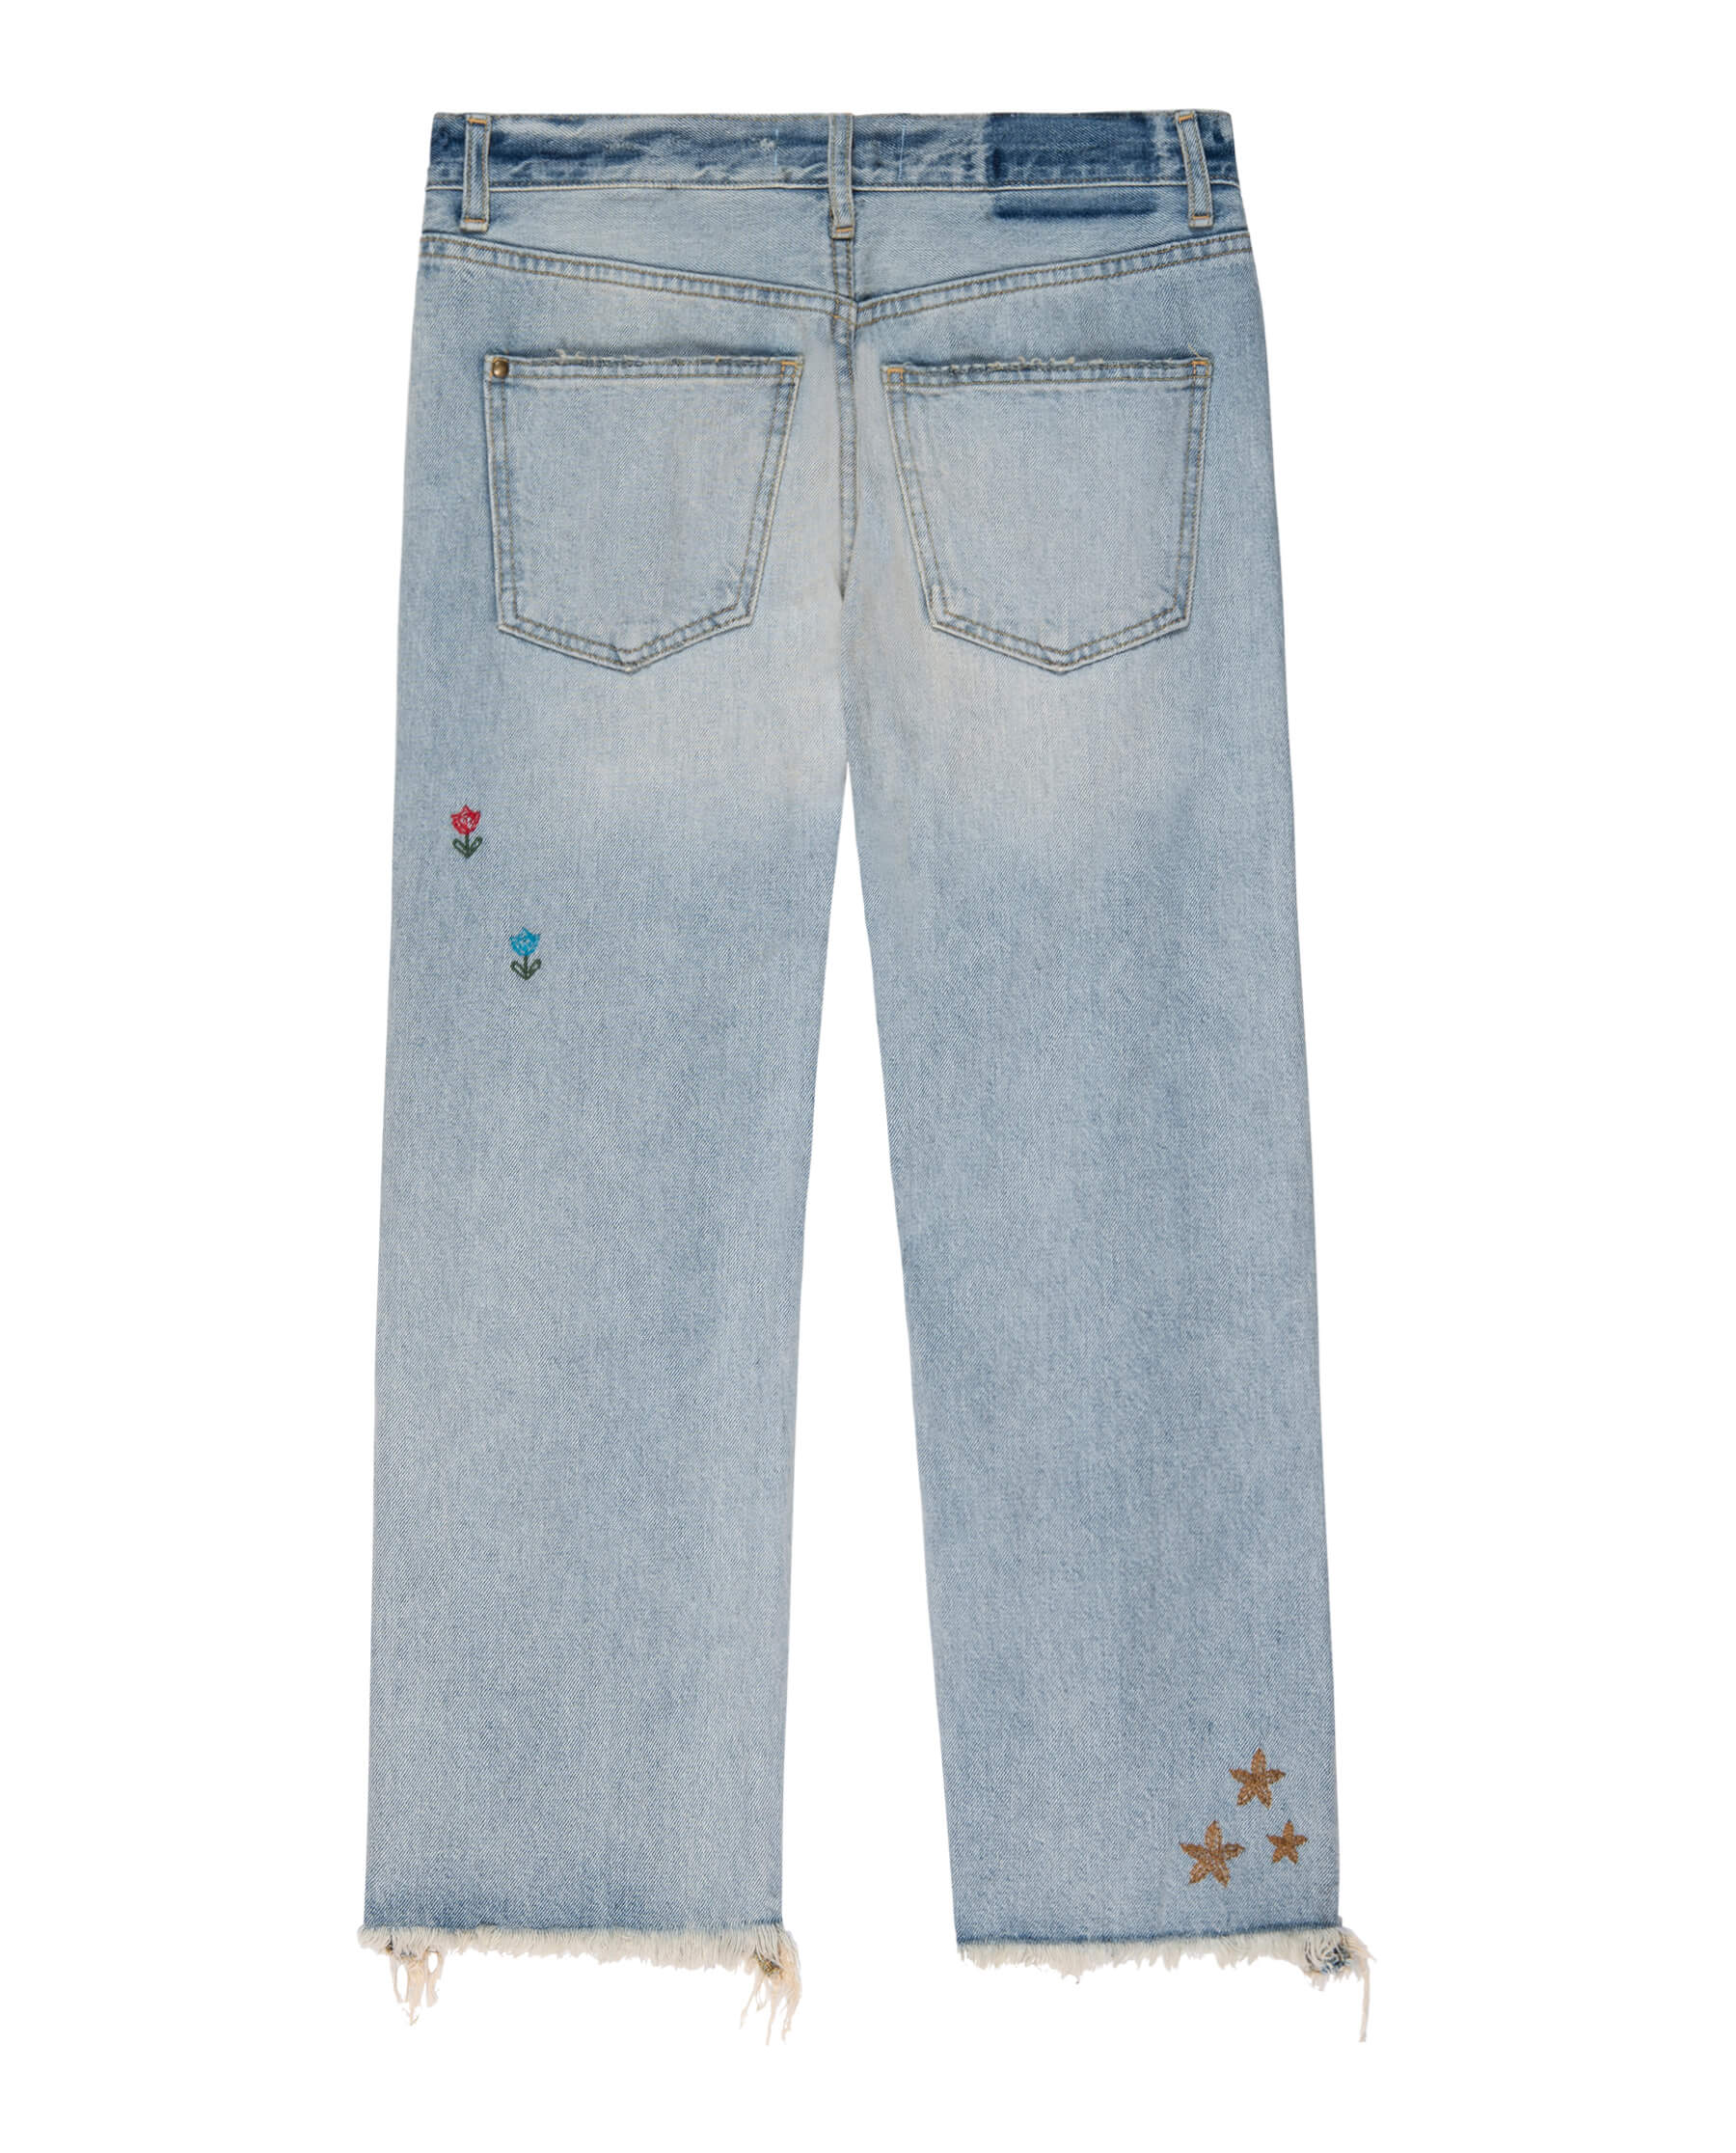 The Embroidered Wayne Jean. -- Kentucky Wash DENIM BOTTOMS THE GREAT. SU23 EMBROIDERY